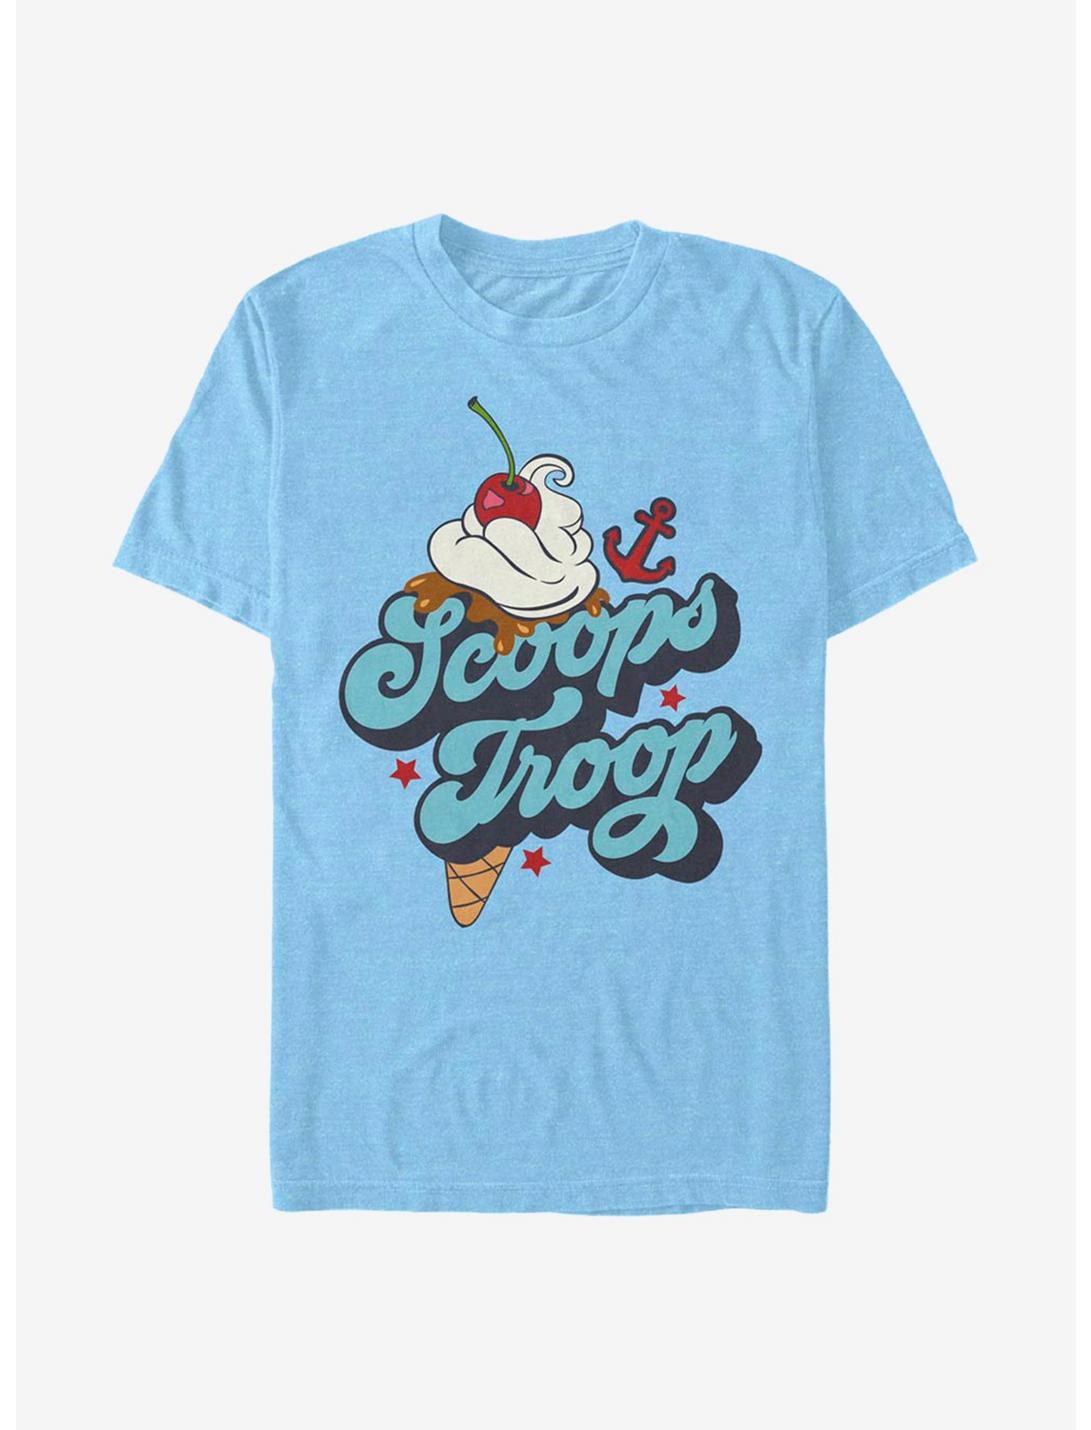 Stranger Things Scoops Troop Ice Cream Extra Soft T-Shirt, LT BLUE, hi-res